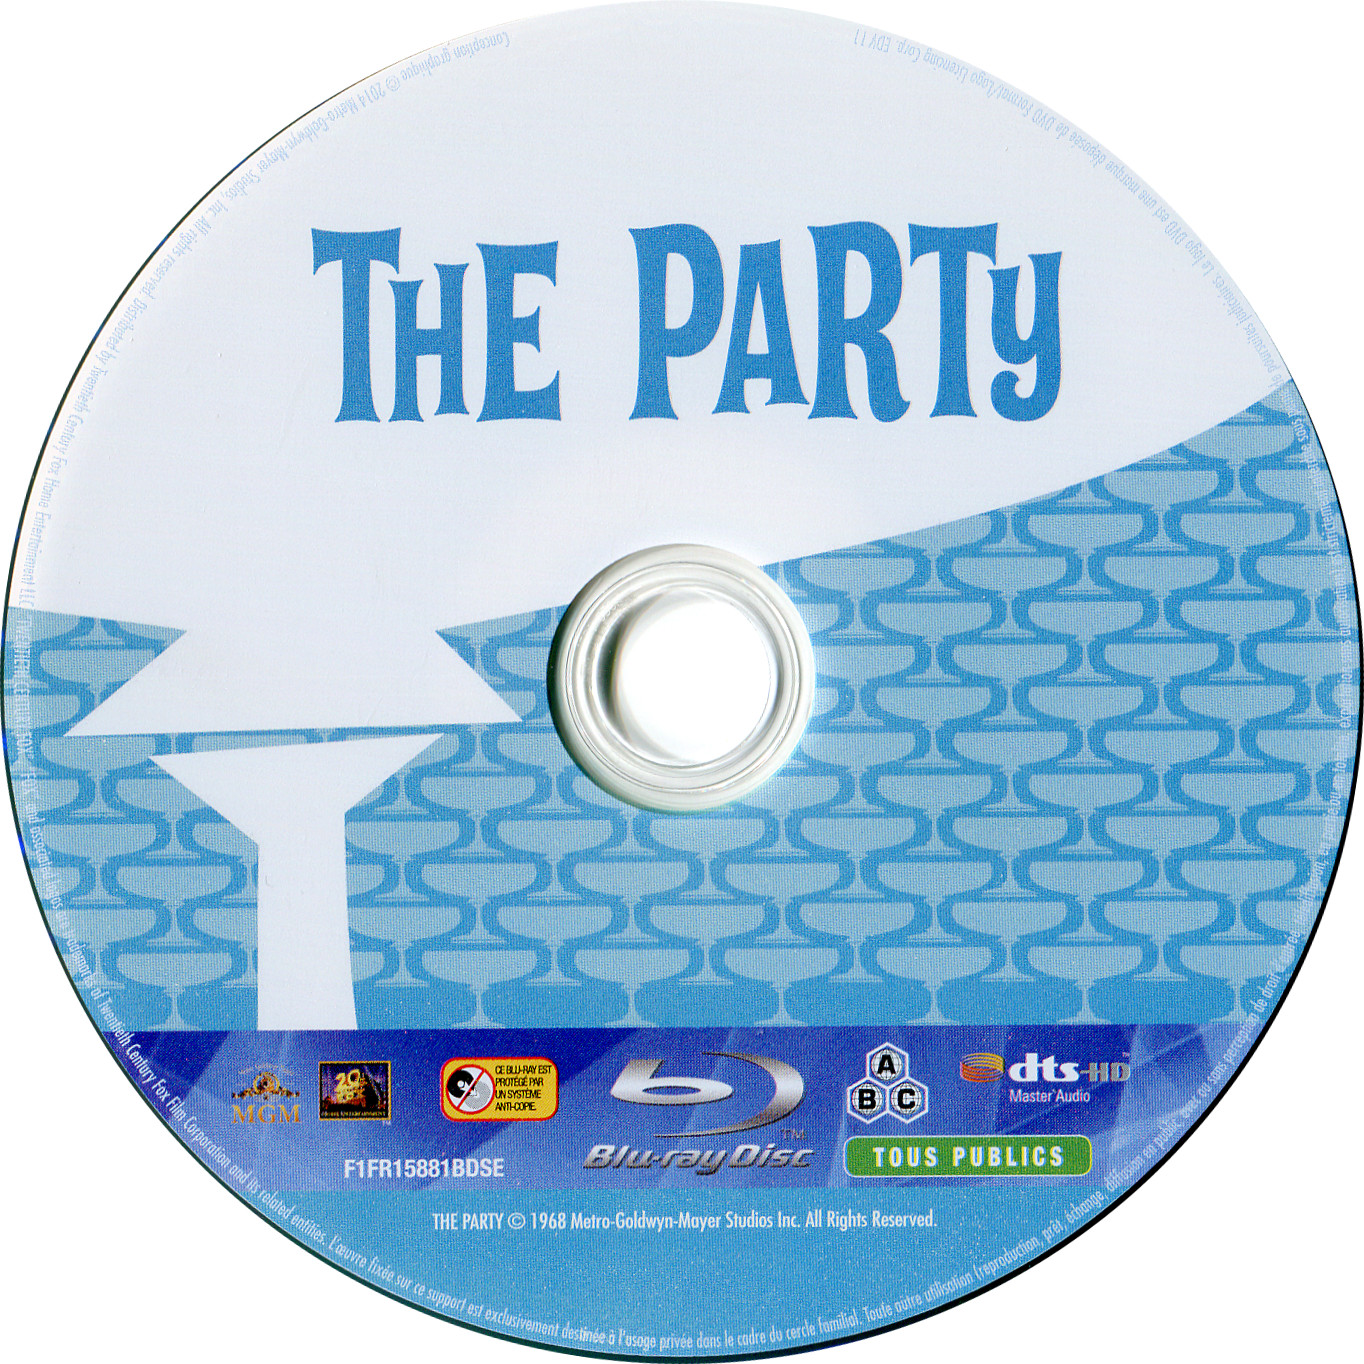 The party (BLU-RAY)